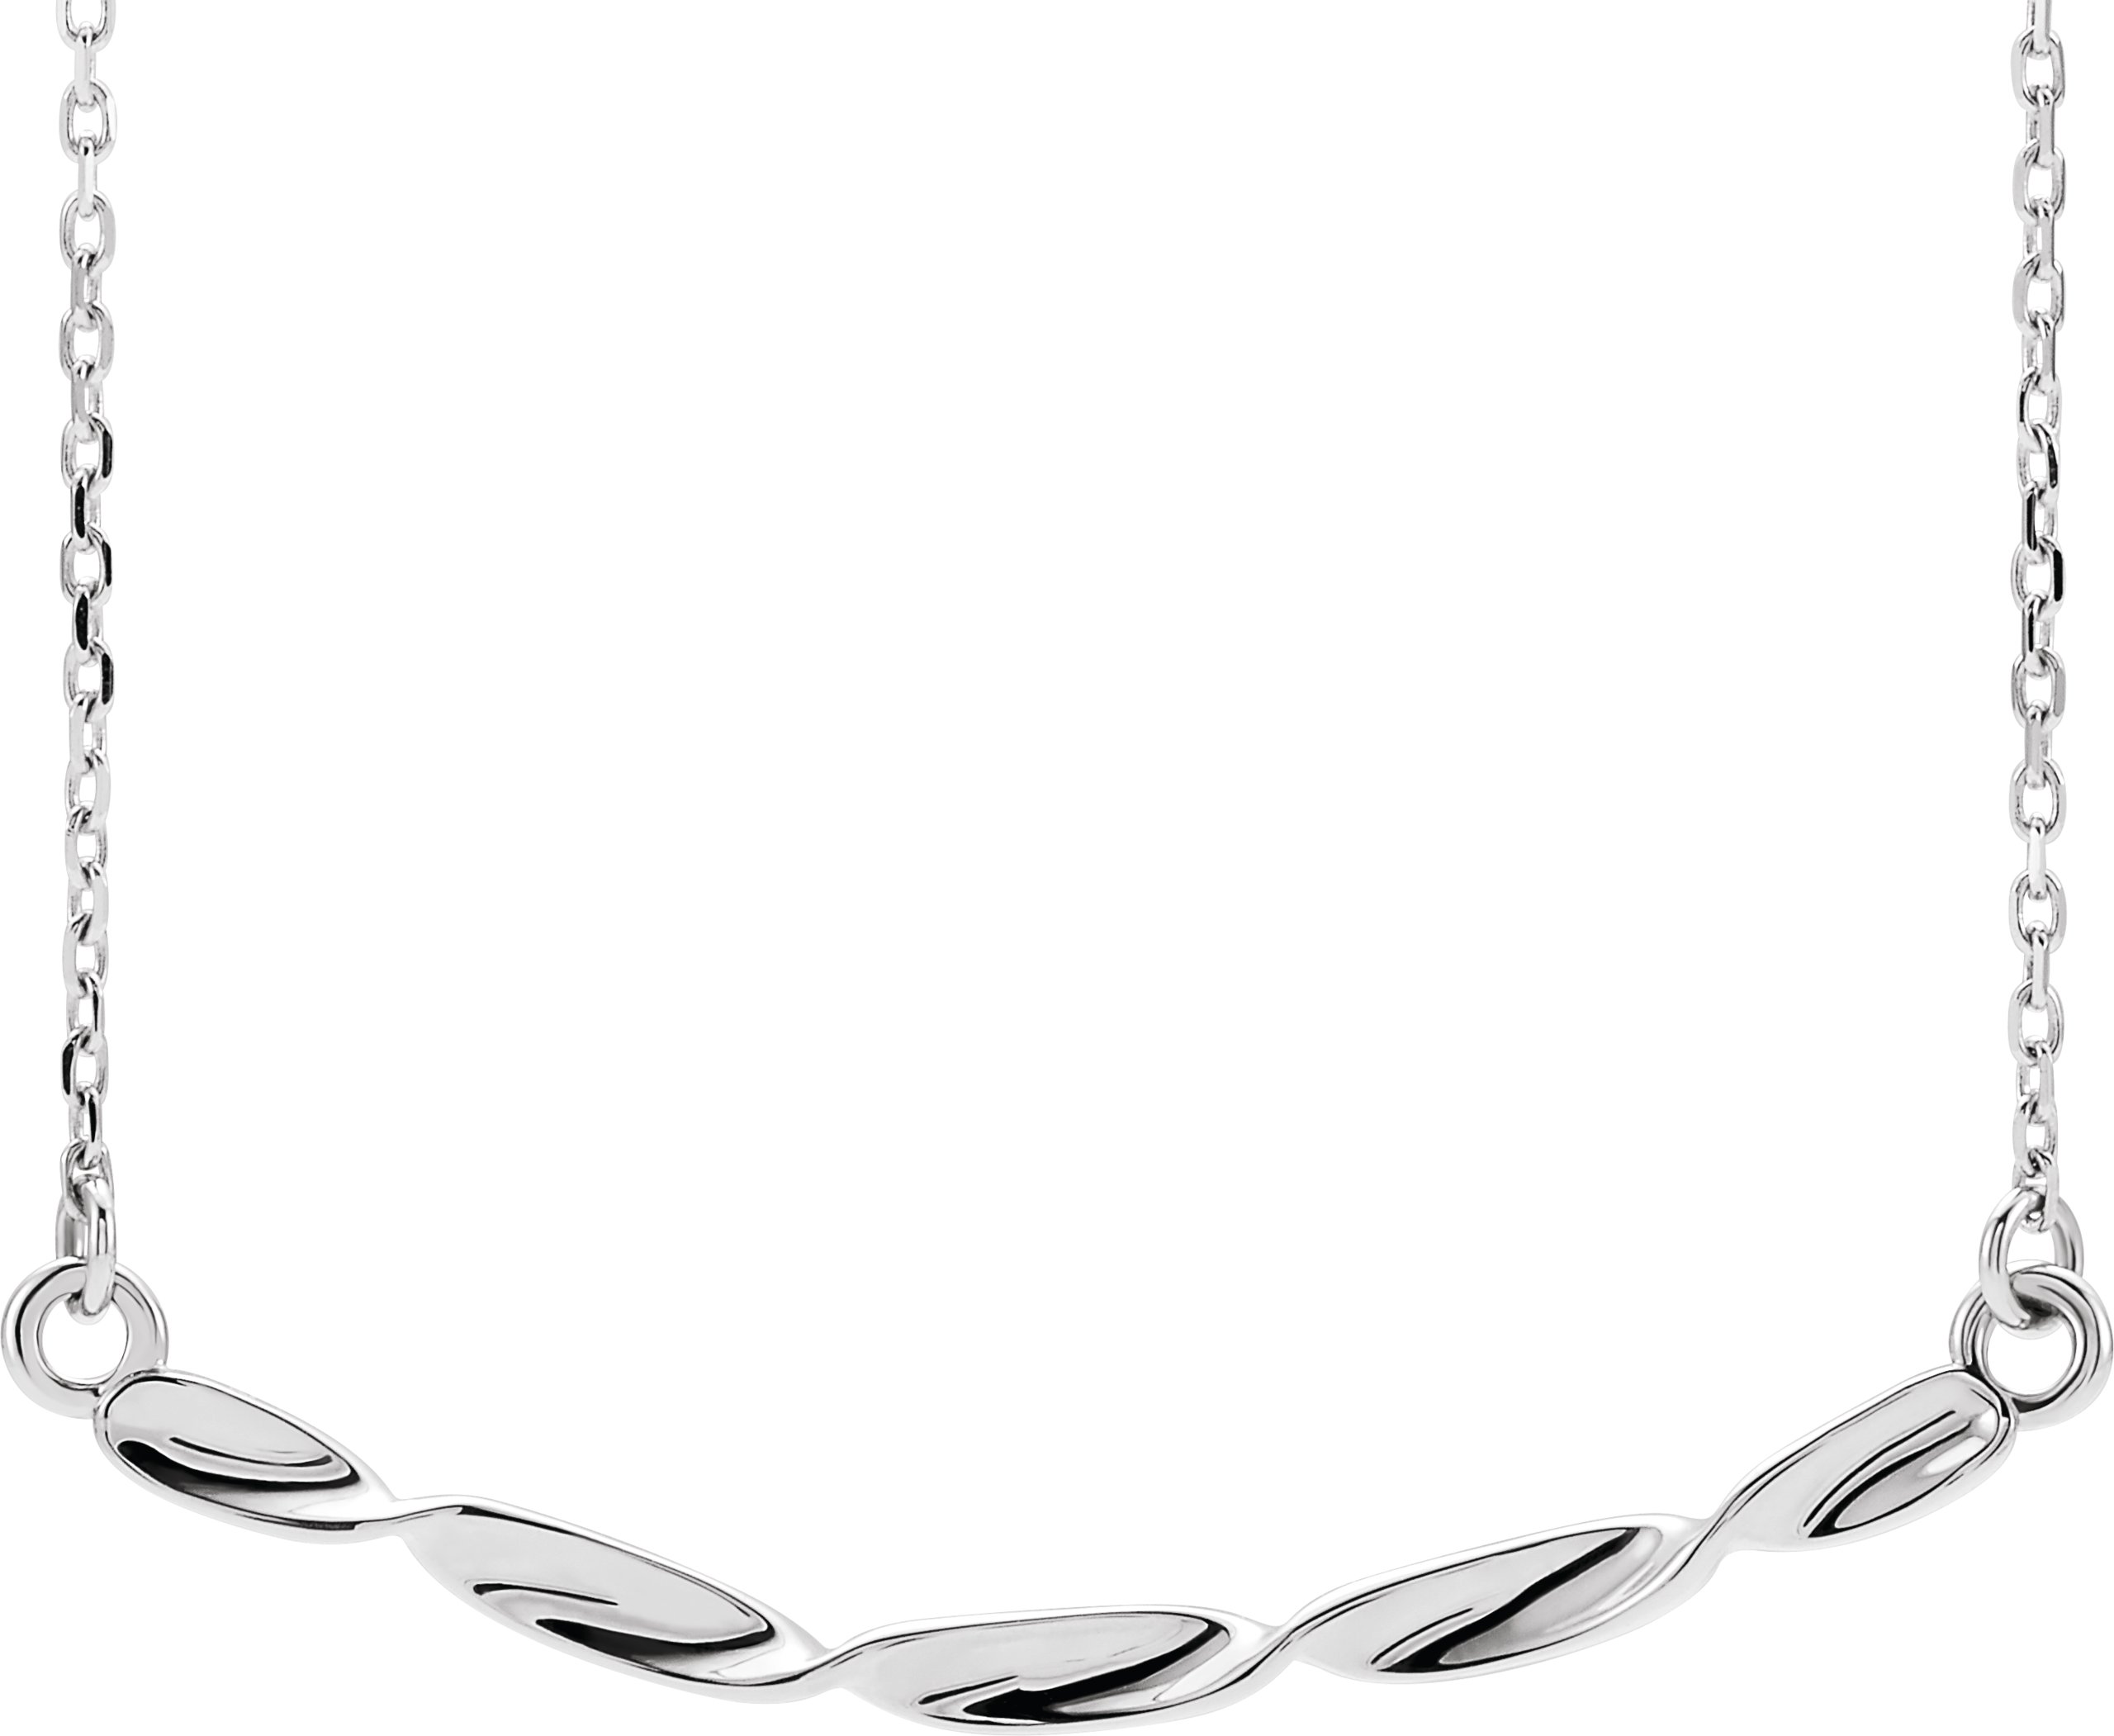 Sterling Silver Twisted Bar 16-18" Necklace